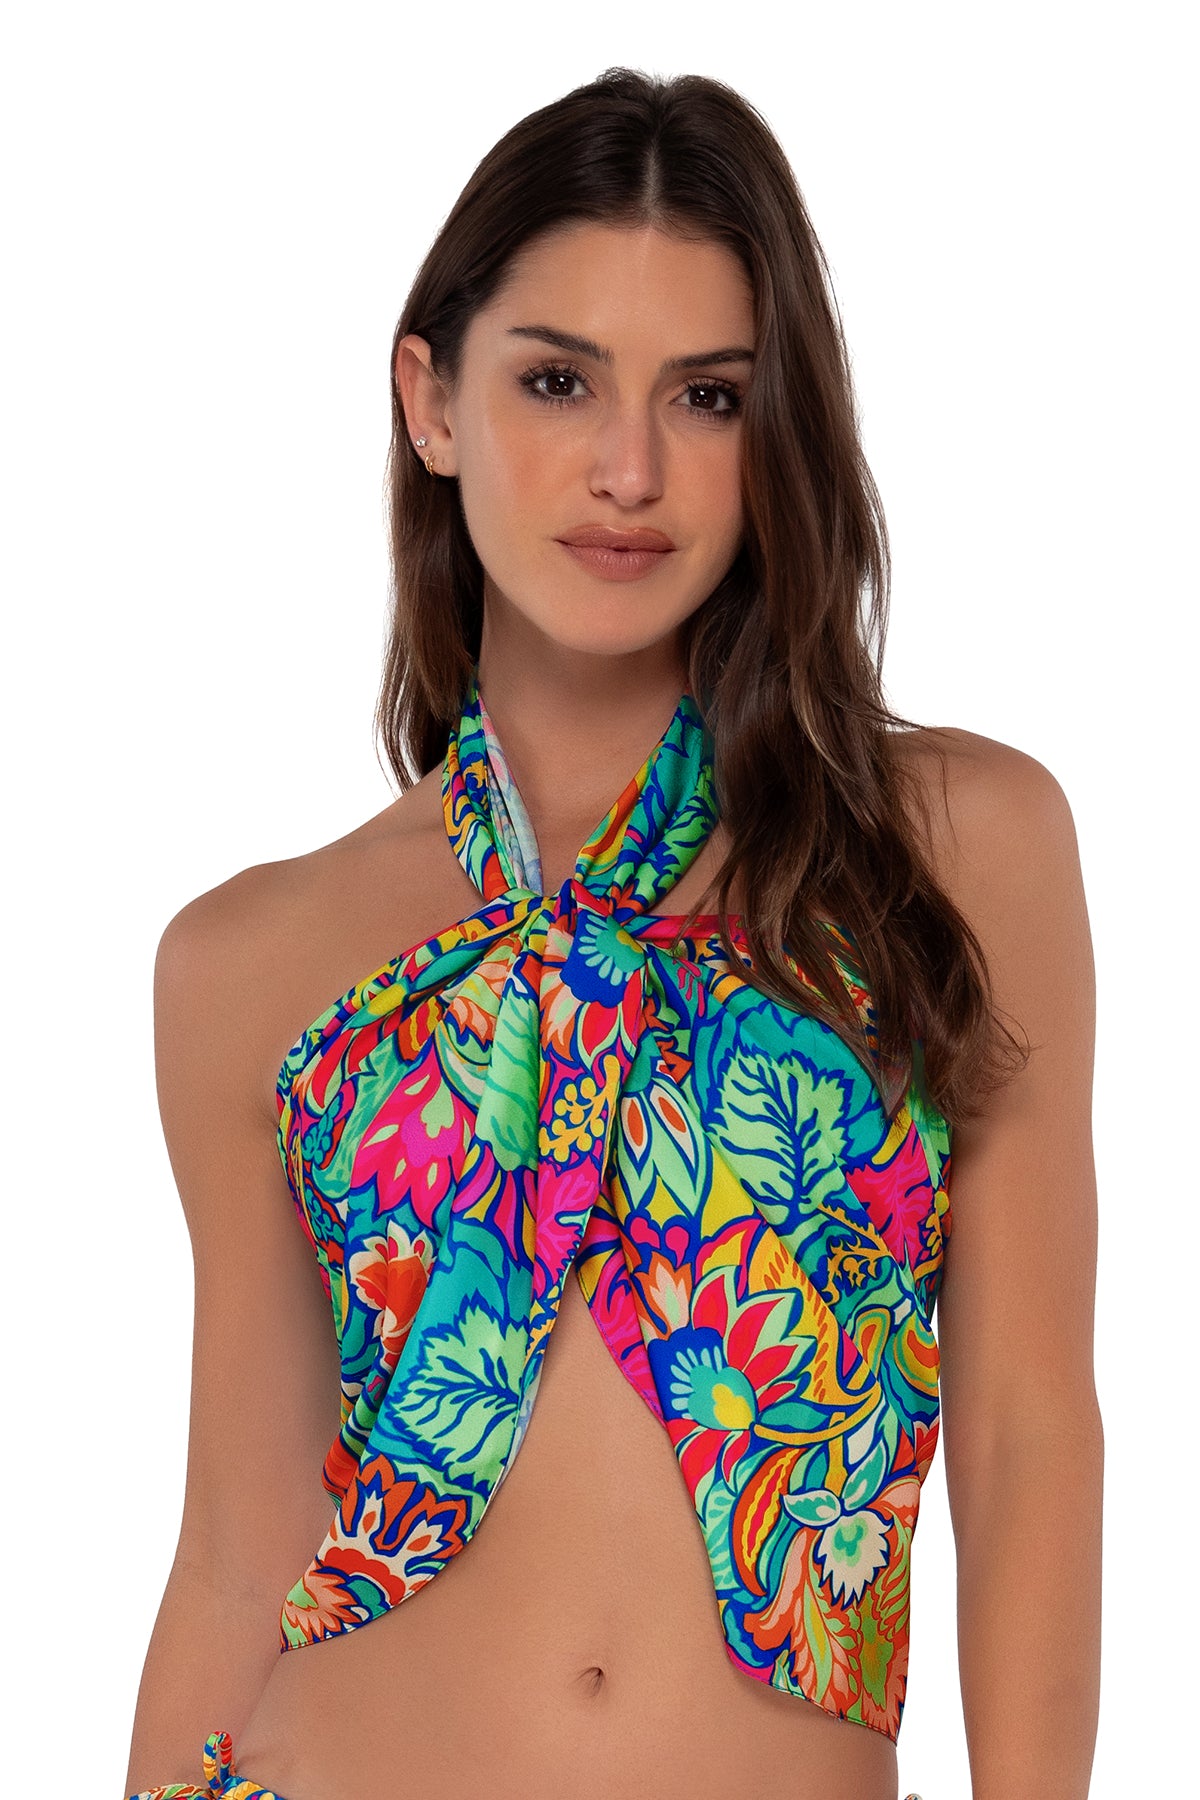 Front pose #1 of Gigi wearing Sunsets Fiji Philomena Pareo as a cross-neck halter Cover-up